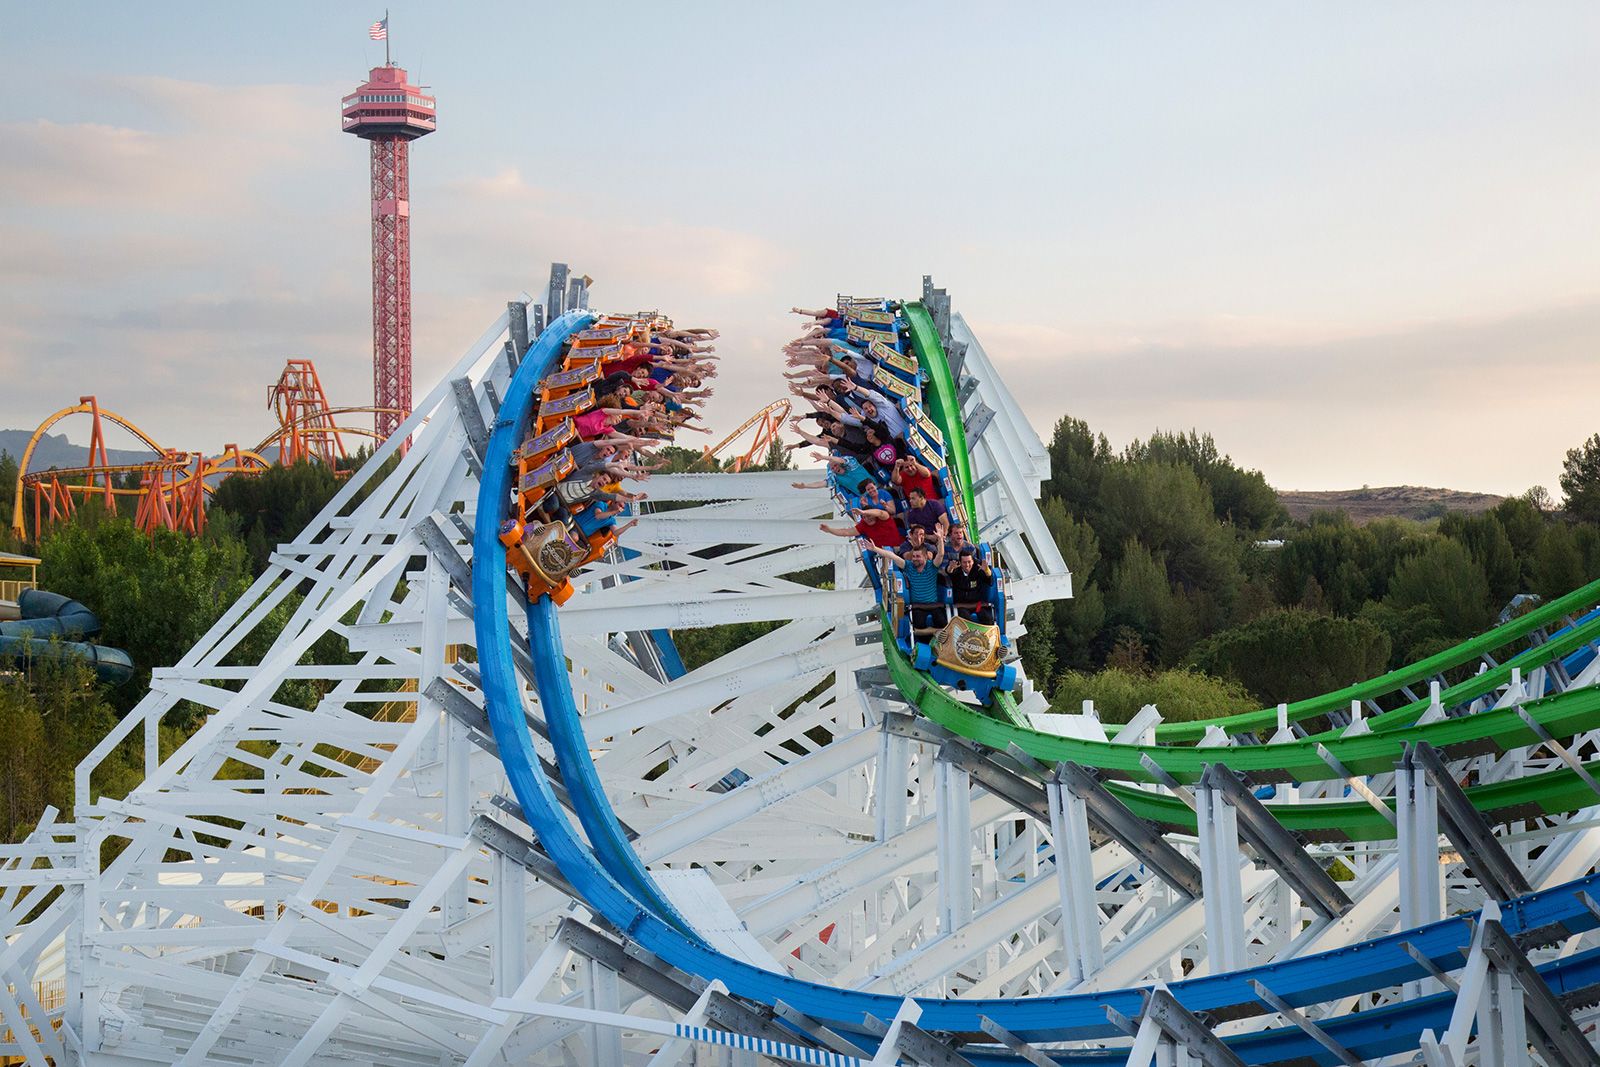 The park with the most roller coasters in the world